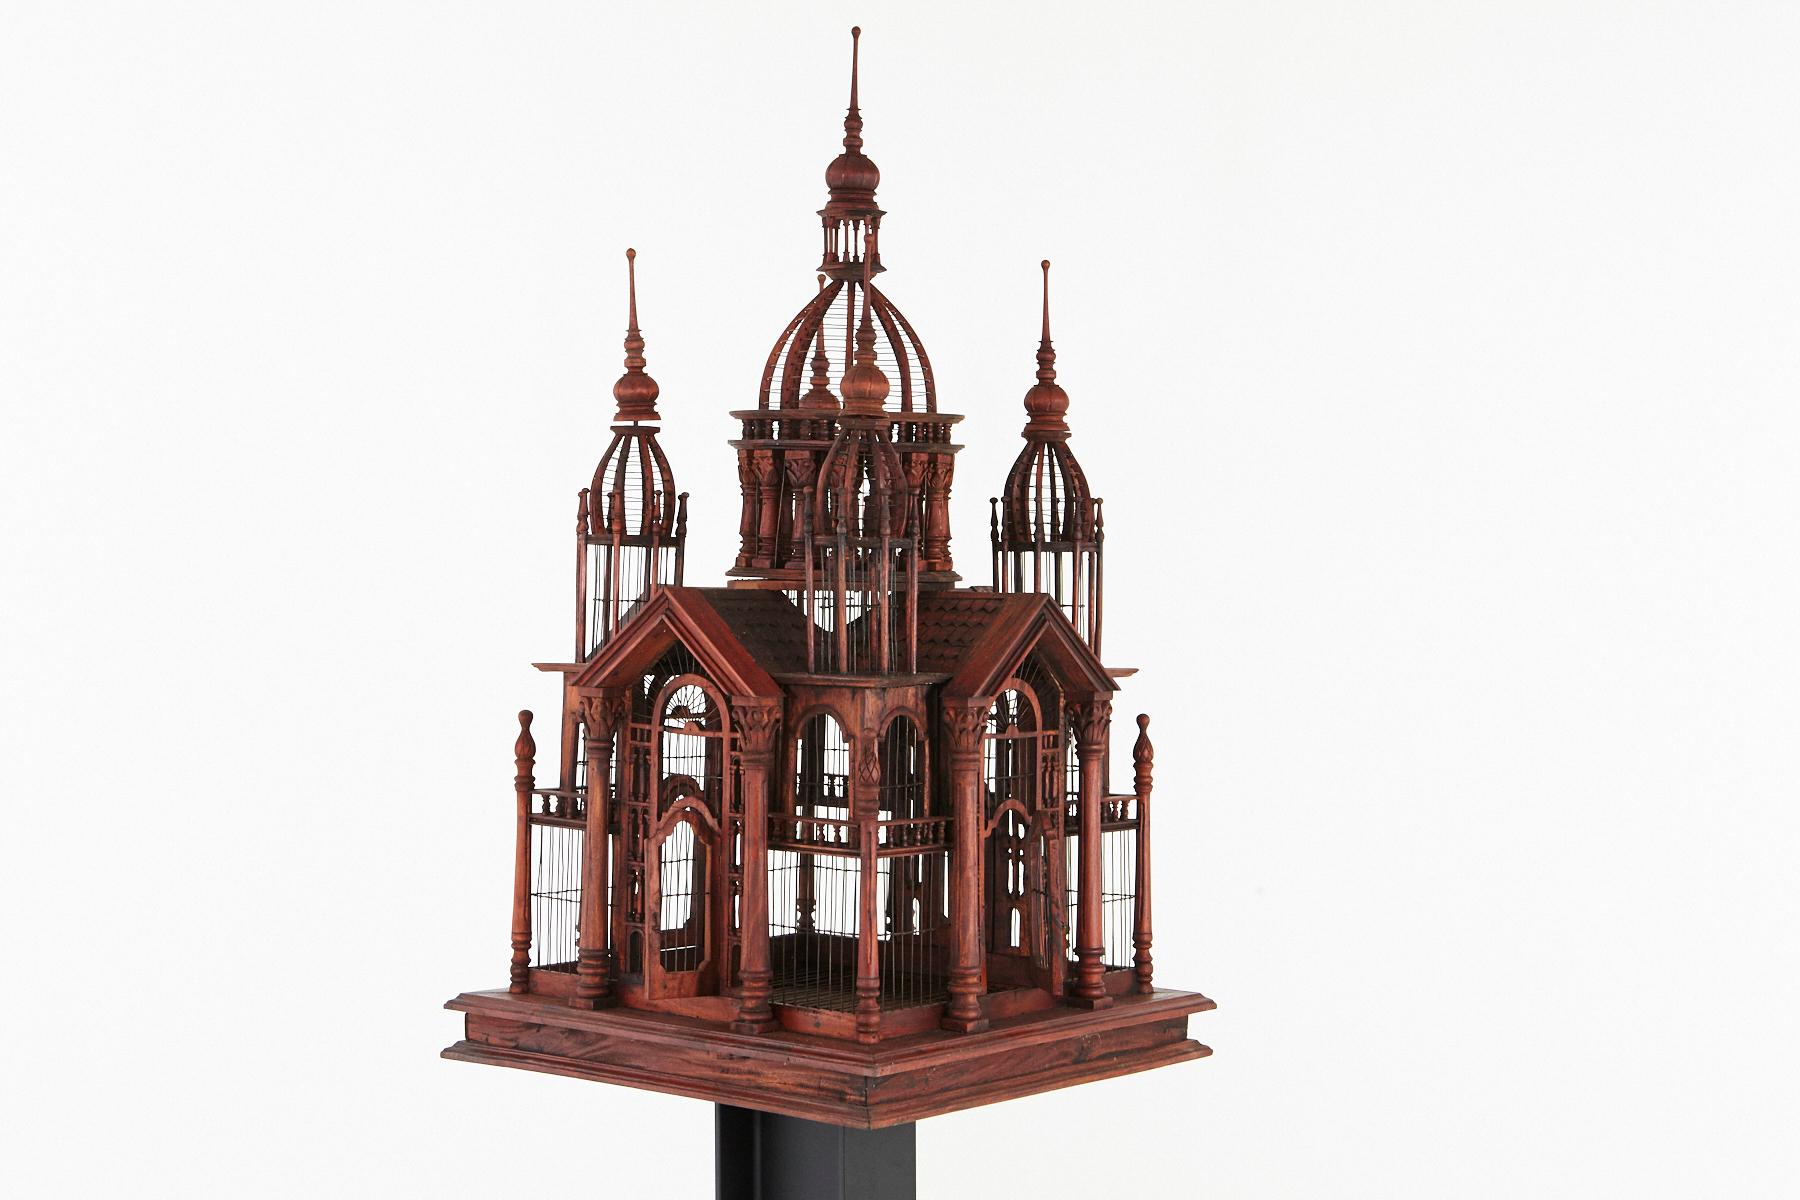 Beautiful large Victorian-style replica of a Raj Palace wire birdcage with an abundance of Victorian architectural details, doors, towers, a cupola, etc. 
The birdcage has never been used, there were never birds inside.
The birdcage is standing flat